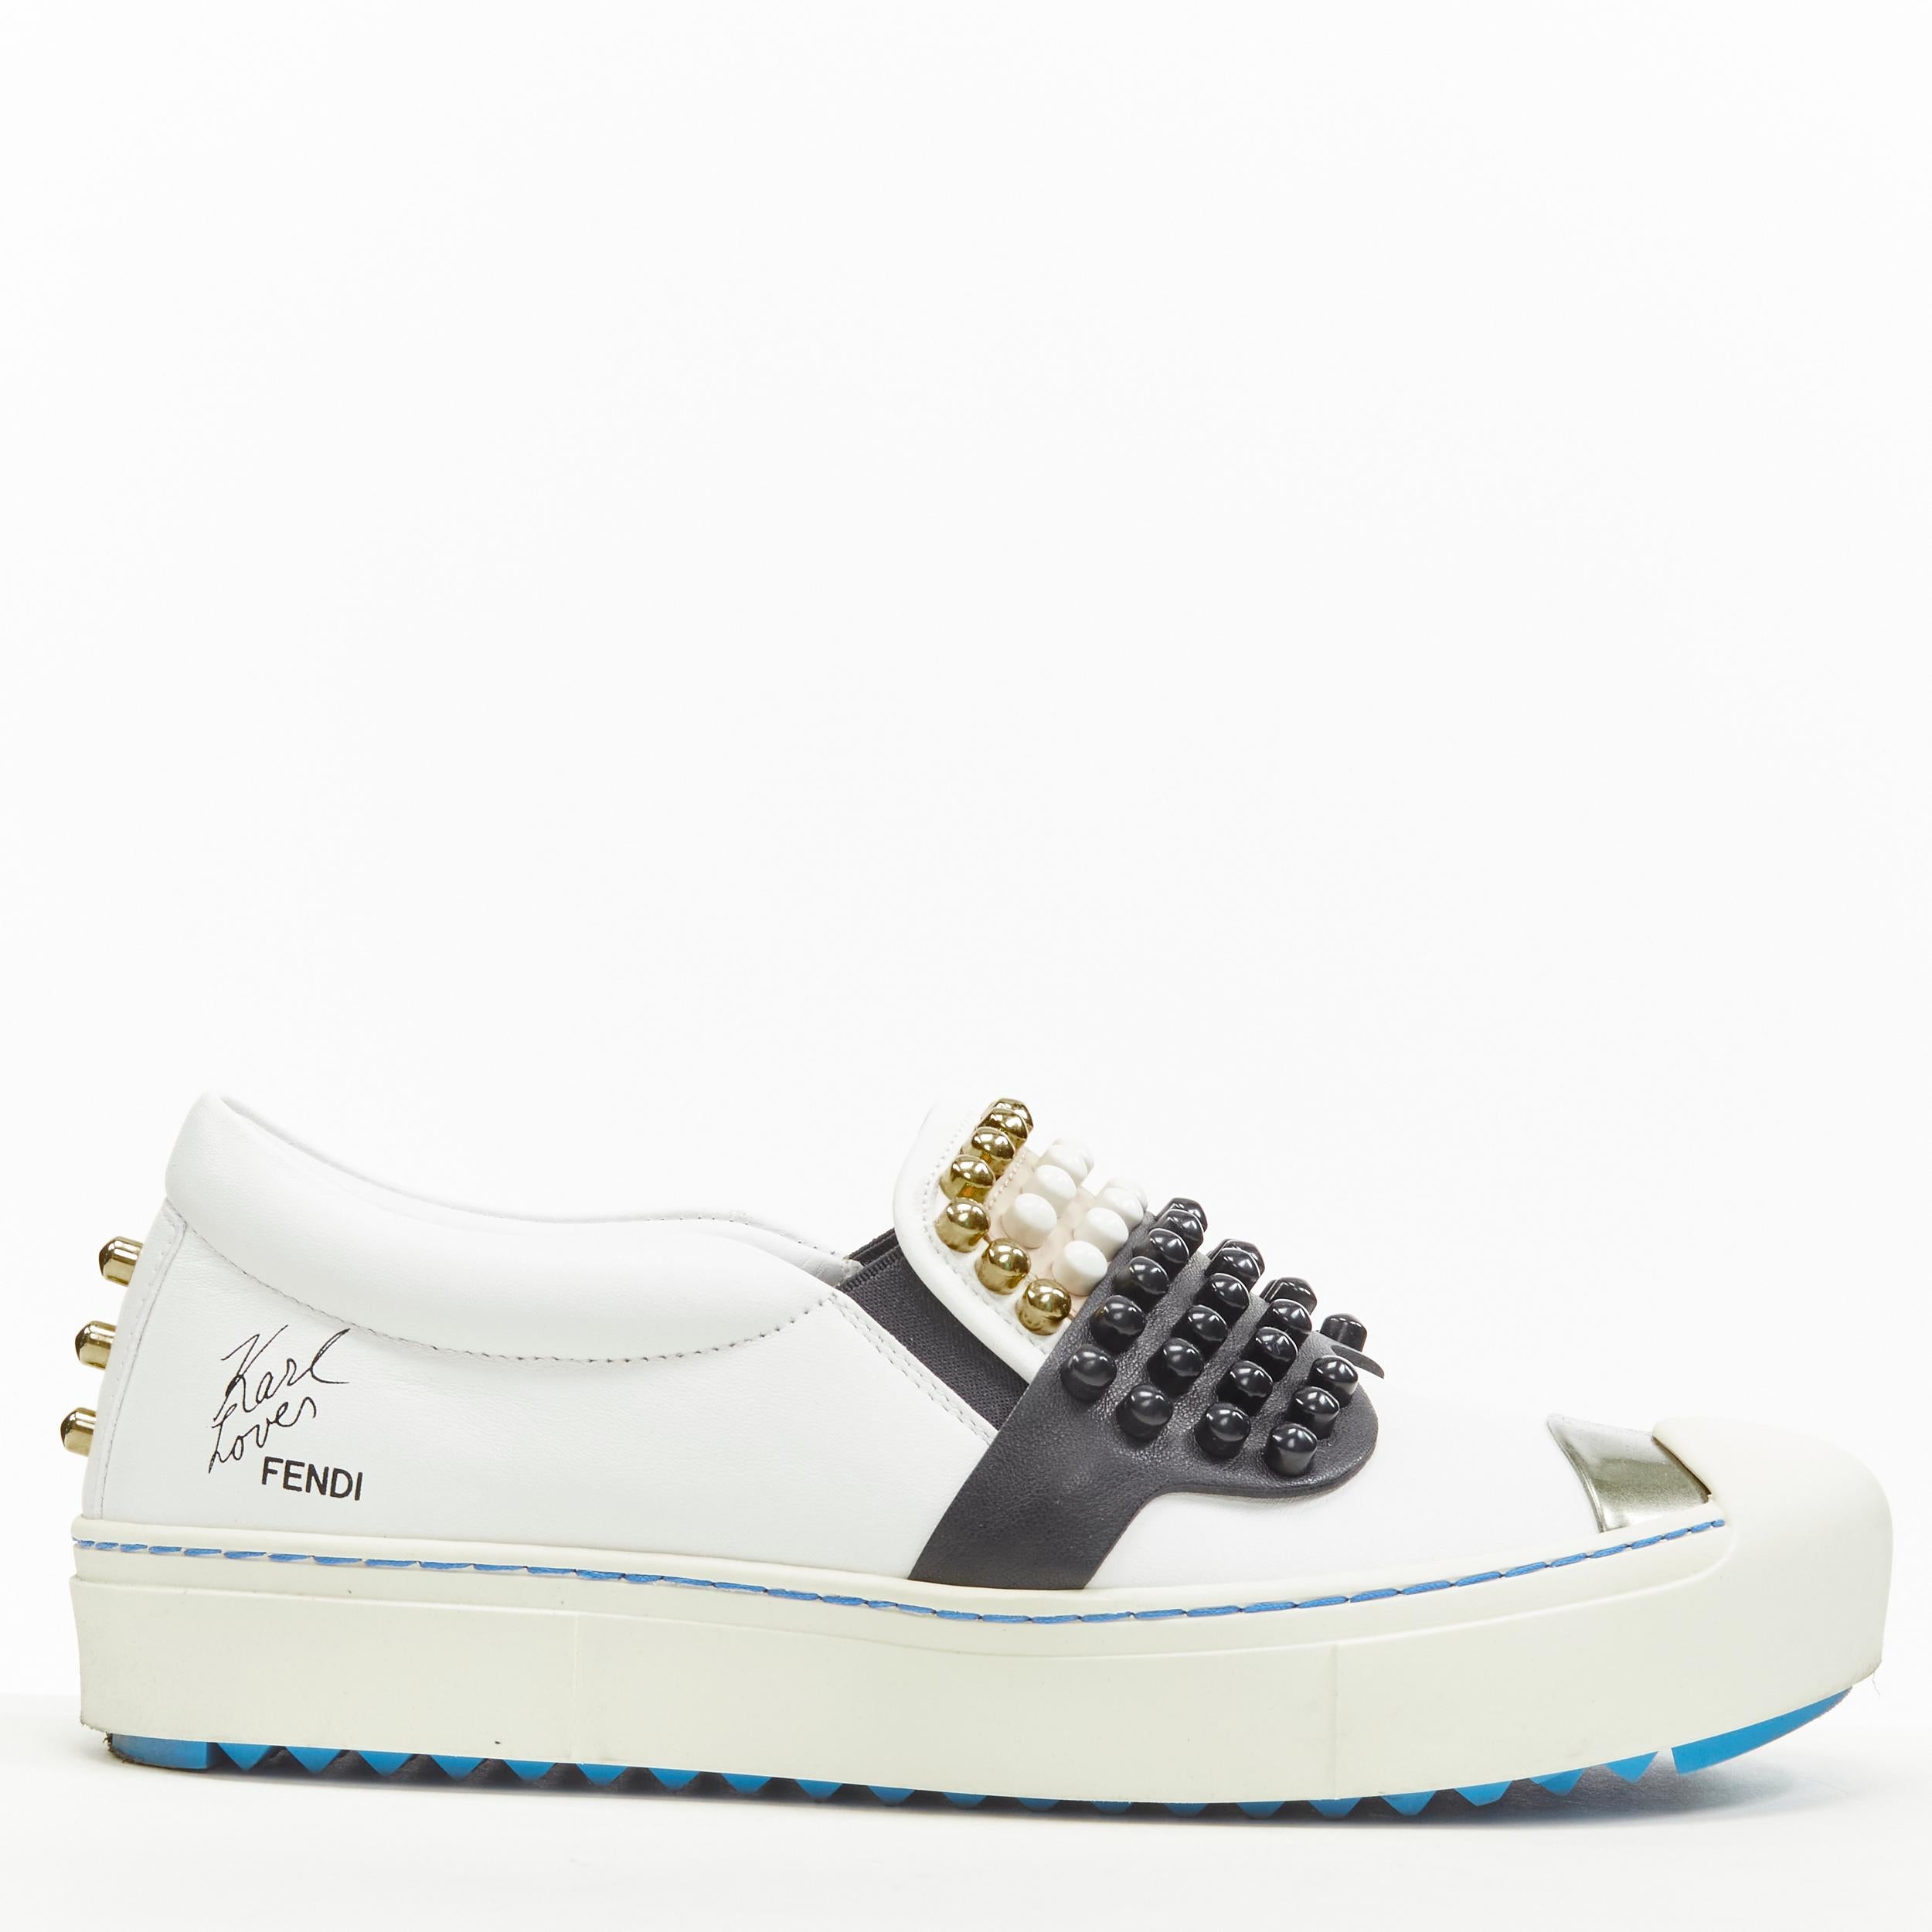 FENDI Karl Loves studded Karlito white leather skate sneakers EU36.5 
Reference: ANWU/A00362 
Brand: Fendi 
Collection: Karl Loves 
Material: Leather 
Color: White 
Pattern: Solid 
Extra Detail: Abstract Karlito face design in ball studs. Rubber